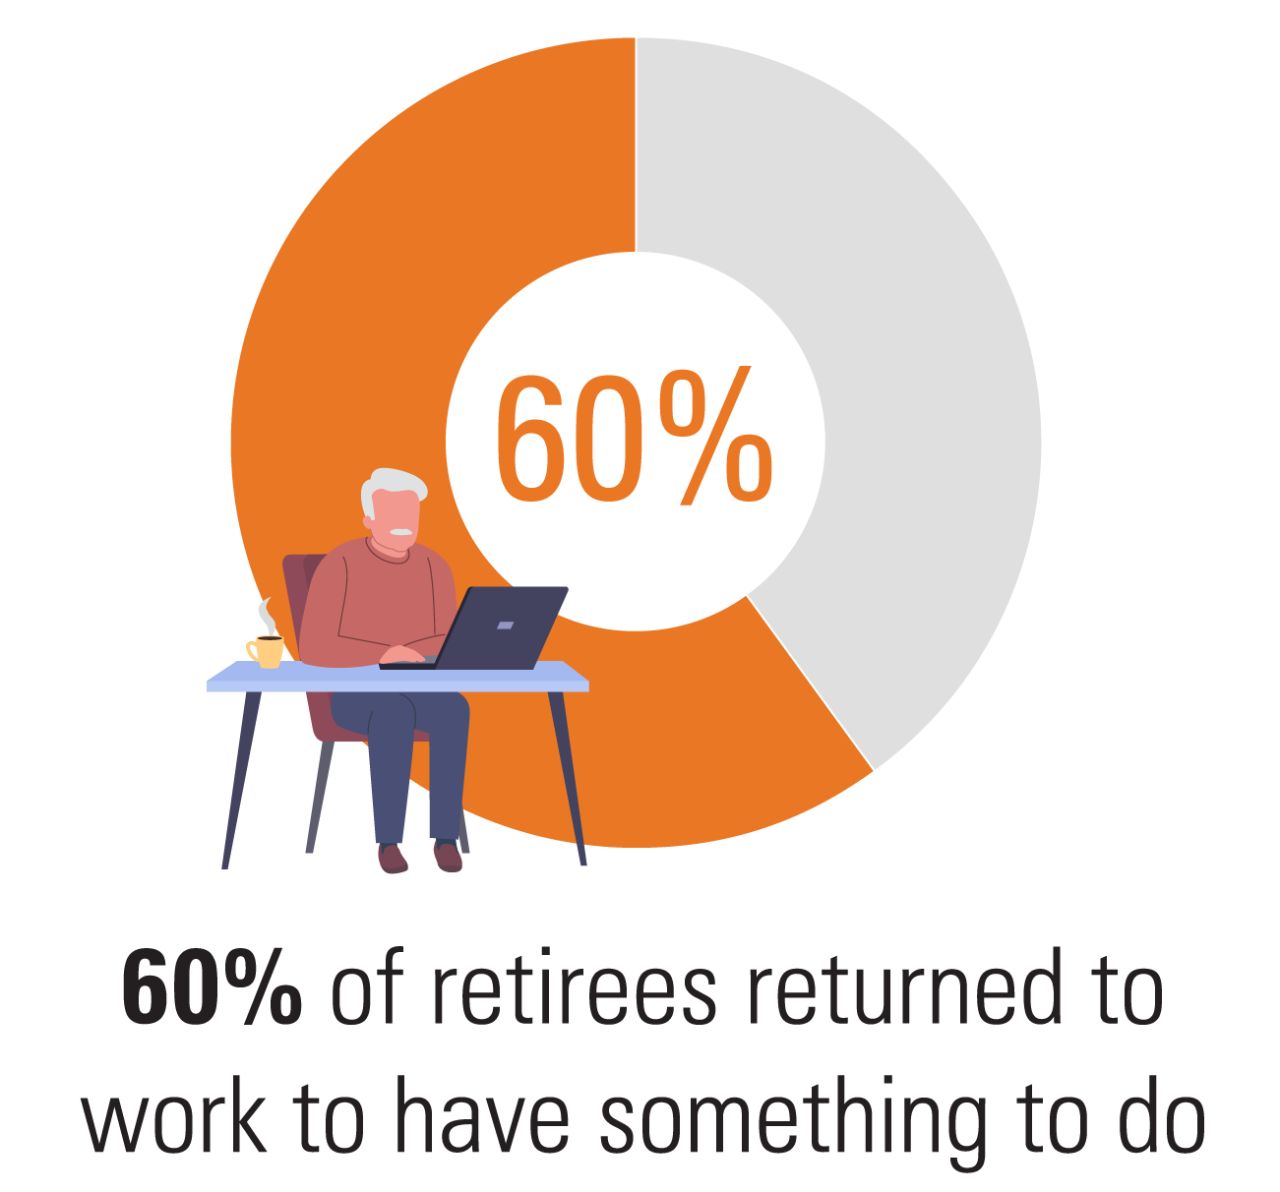 60% of retirees returned to work to have something to do